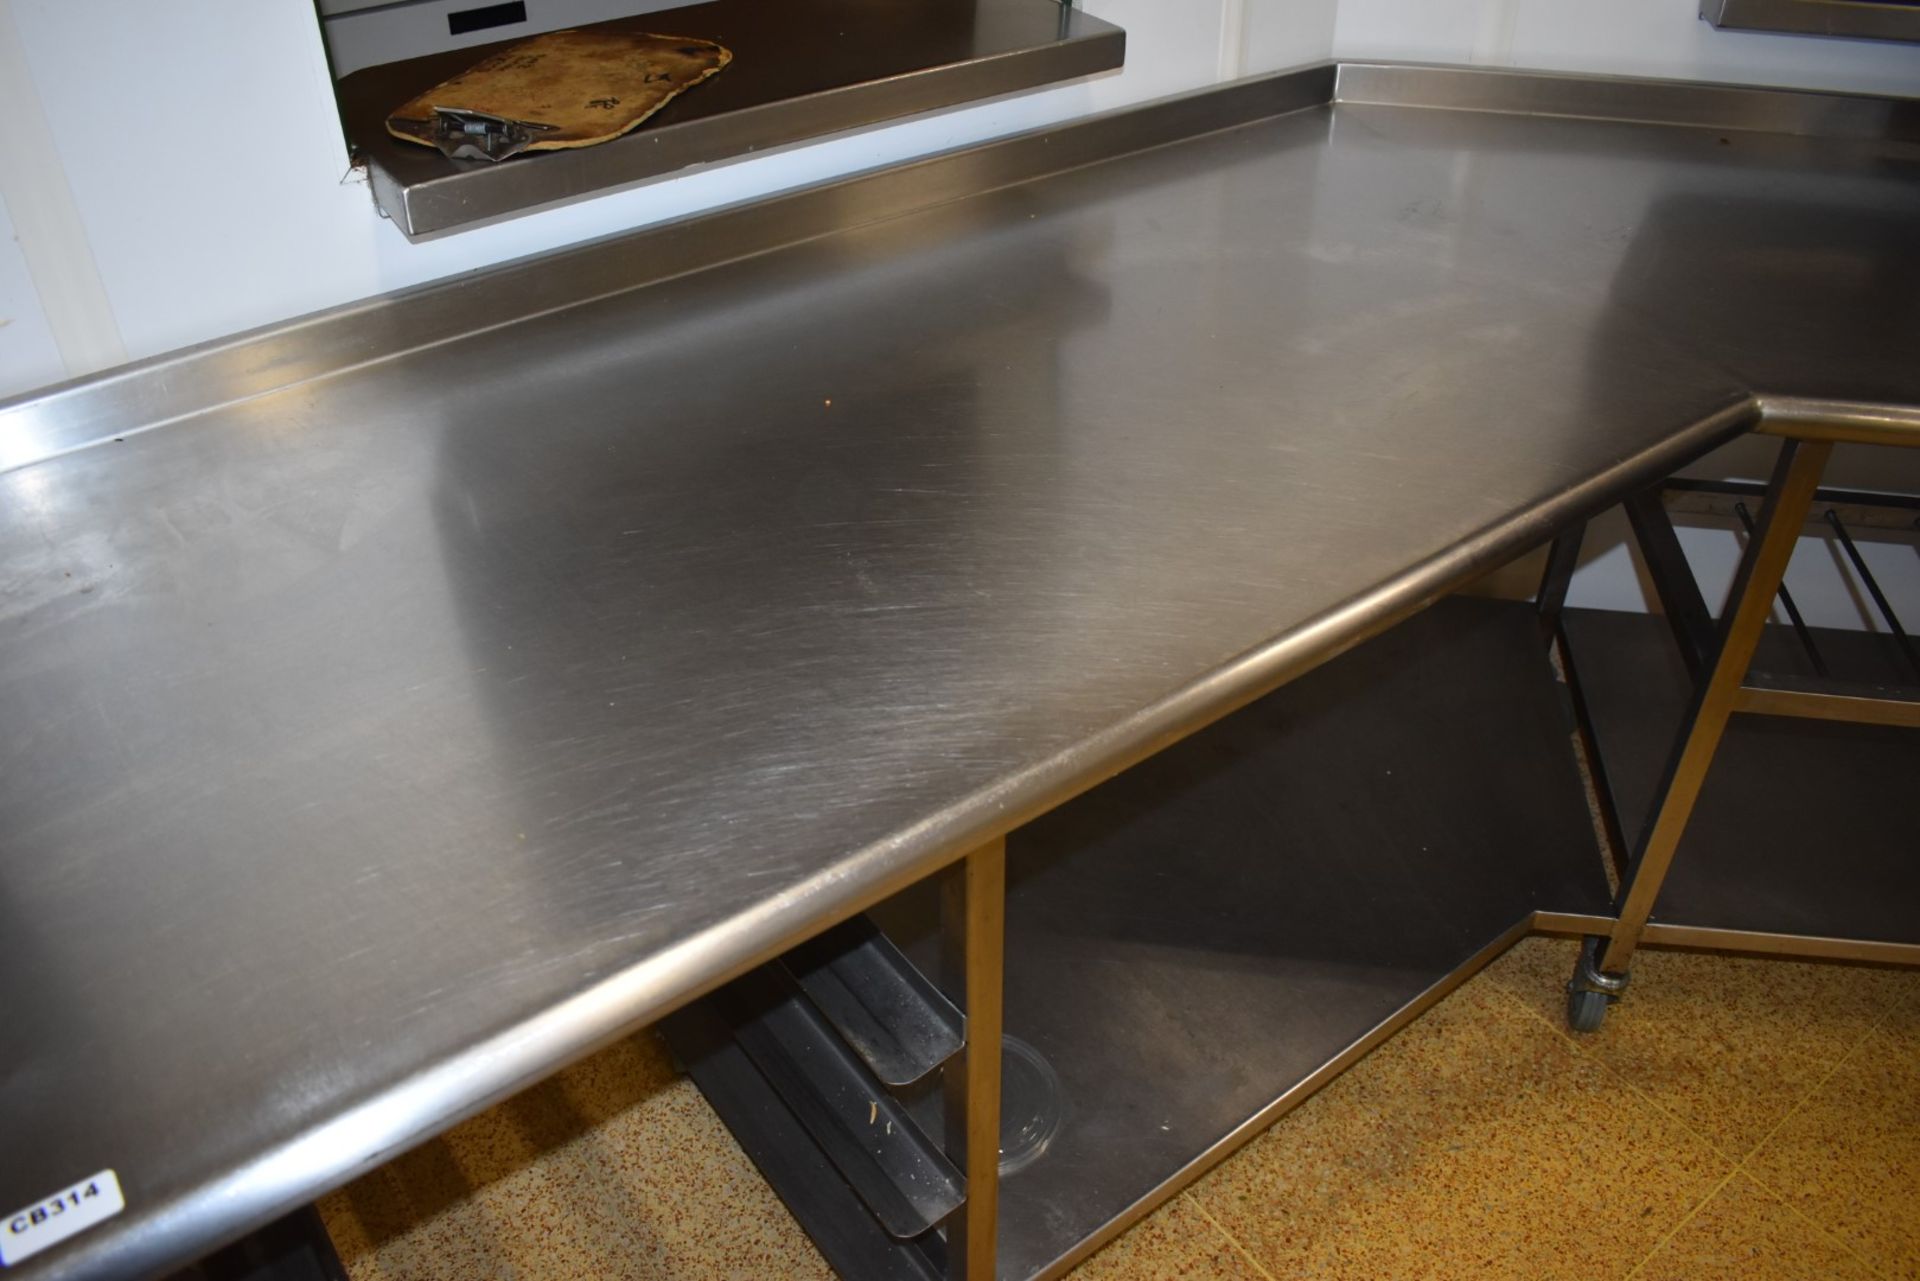 1 x Large Stainless Steel Corner Shaped Prep Table on Castors With Upstand, Undershelf, Tray Rails - Image 2 of 6